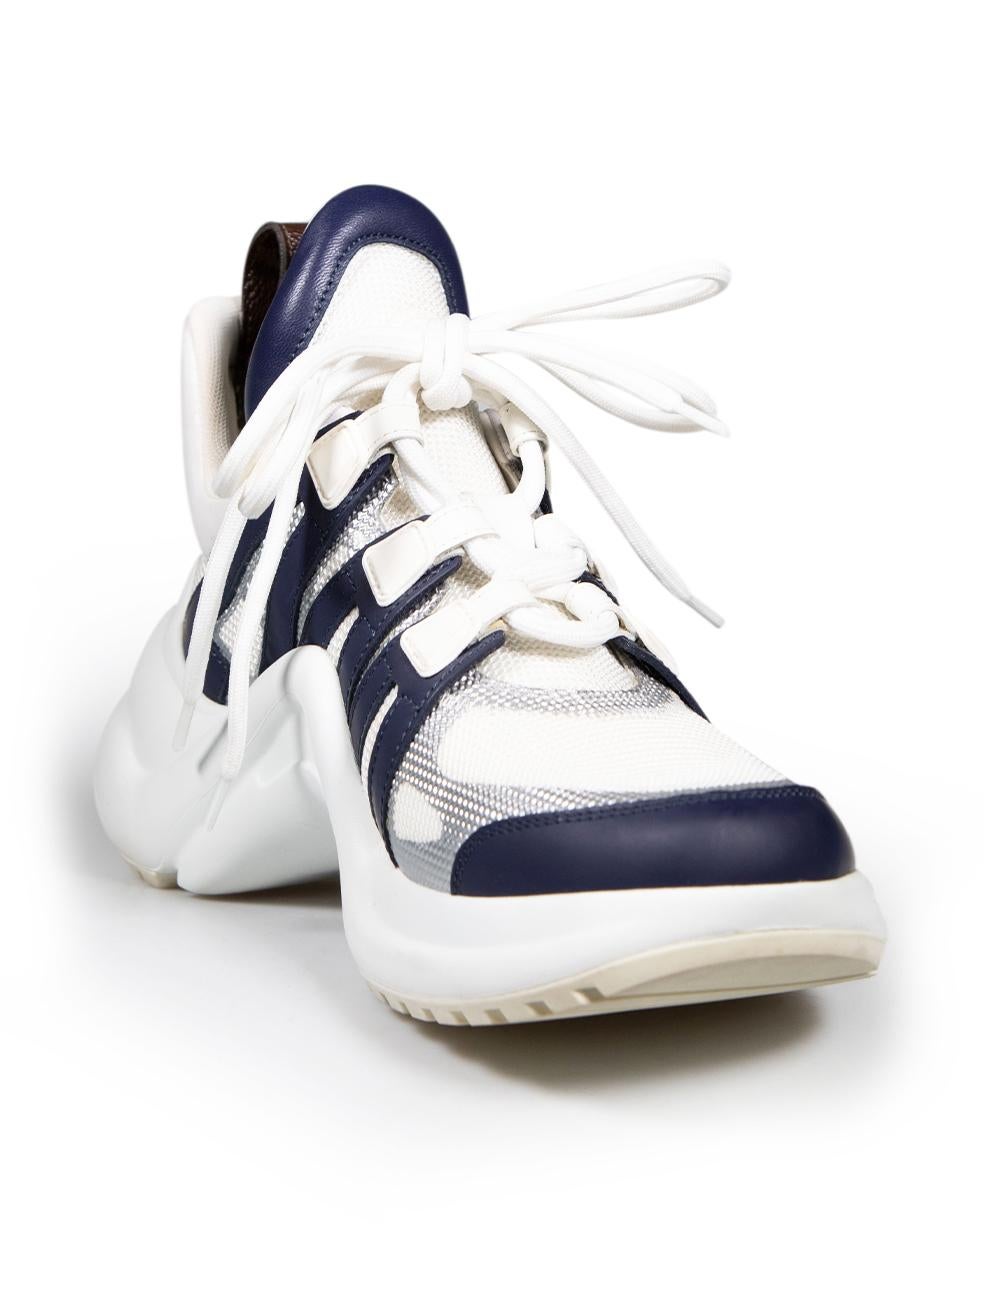 CONDITION is Very good. Minimal wear to shoes is evident. Minimal wear to the laces with discoloured marks on this used Louis Vuitton designer resale item.
 
 Details
 Model: Arclight
 White
 Cloth textile
 Trainers
 Navy leather trim
 Chunky sole
